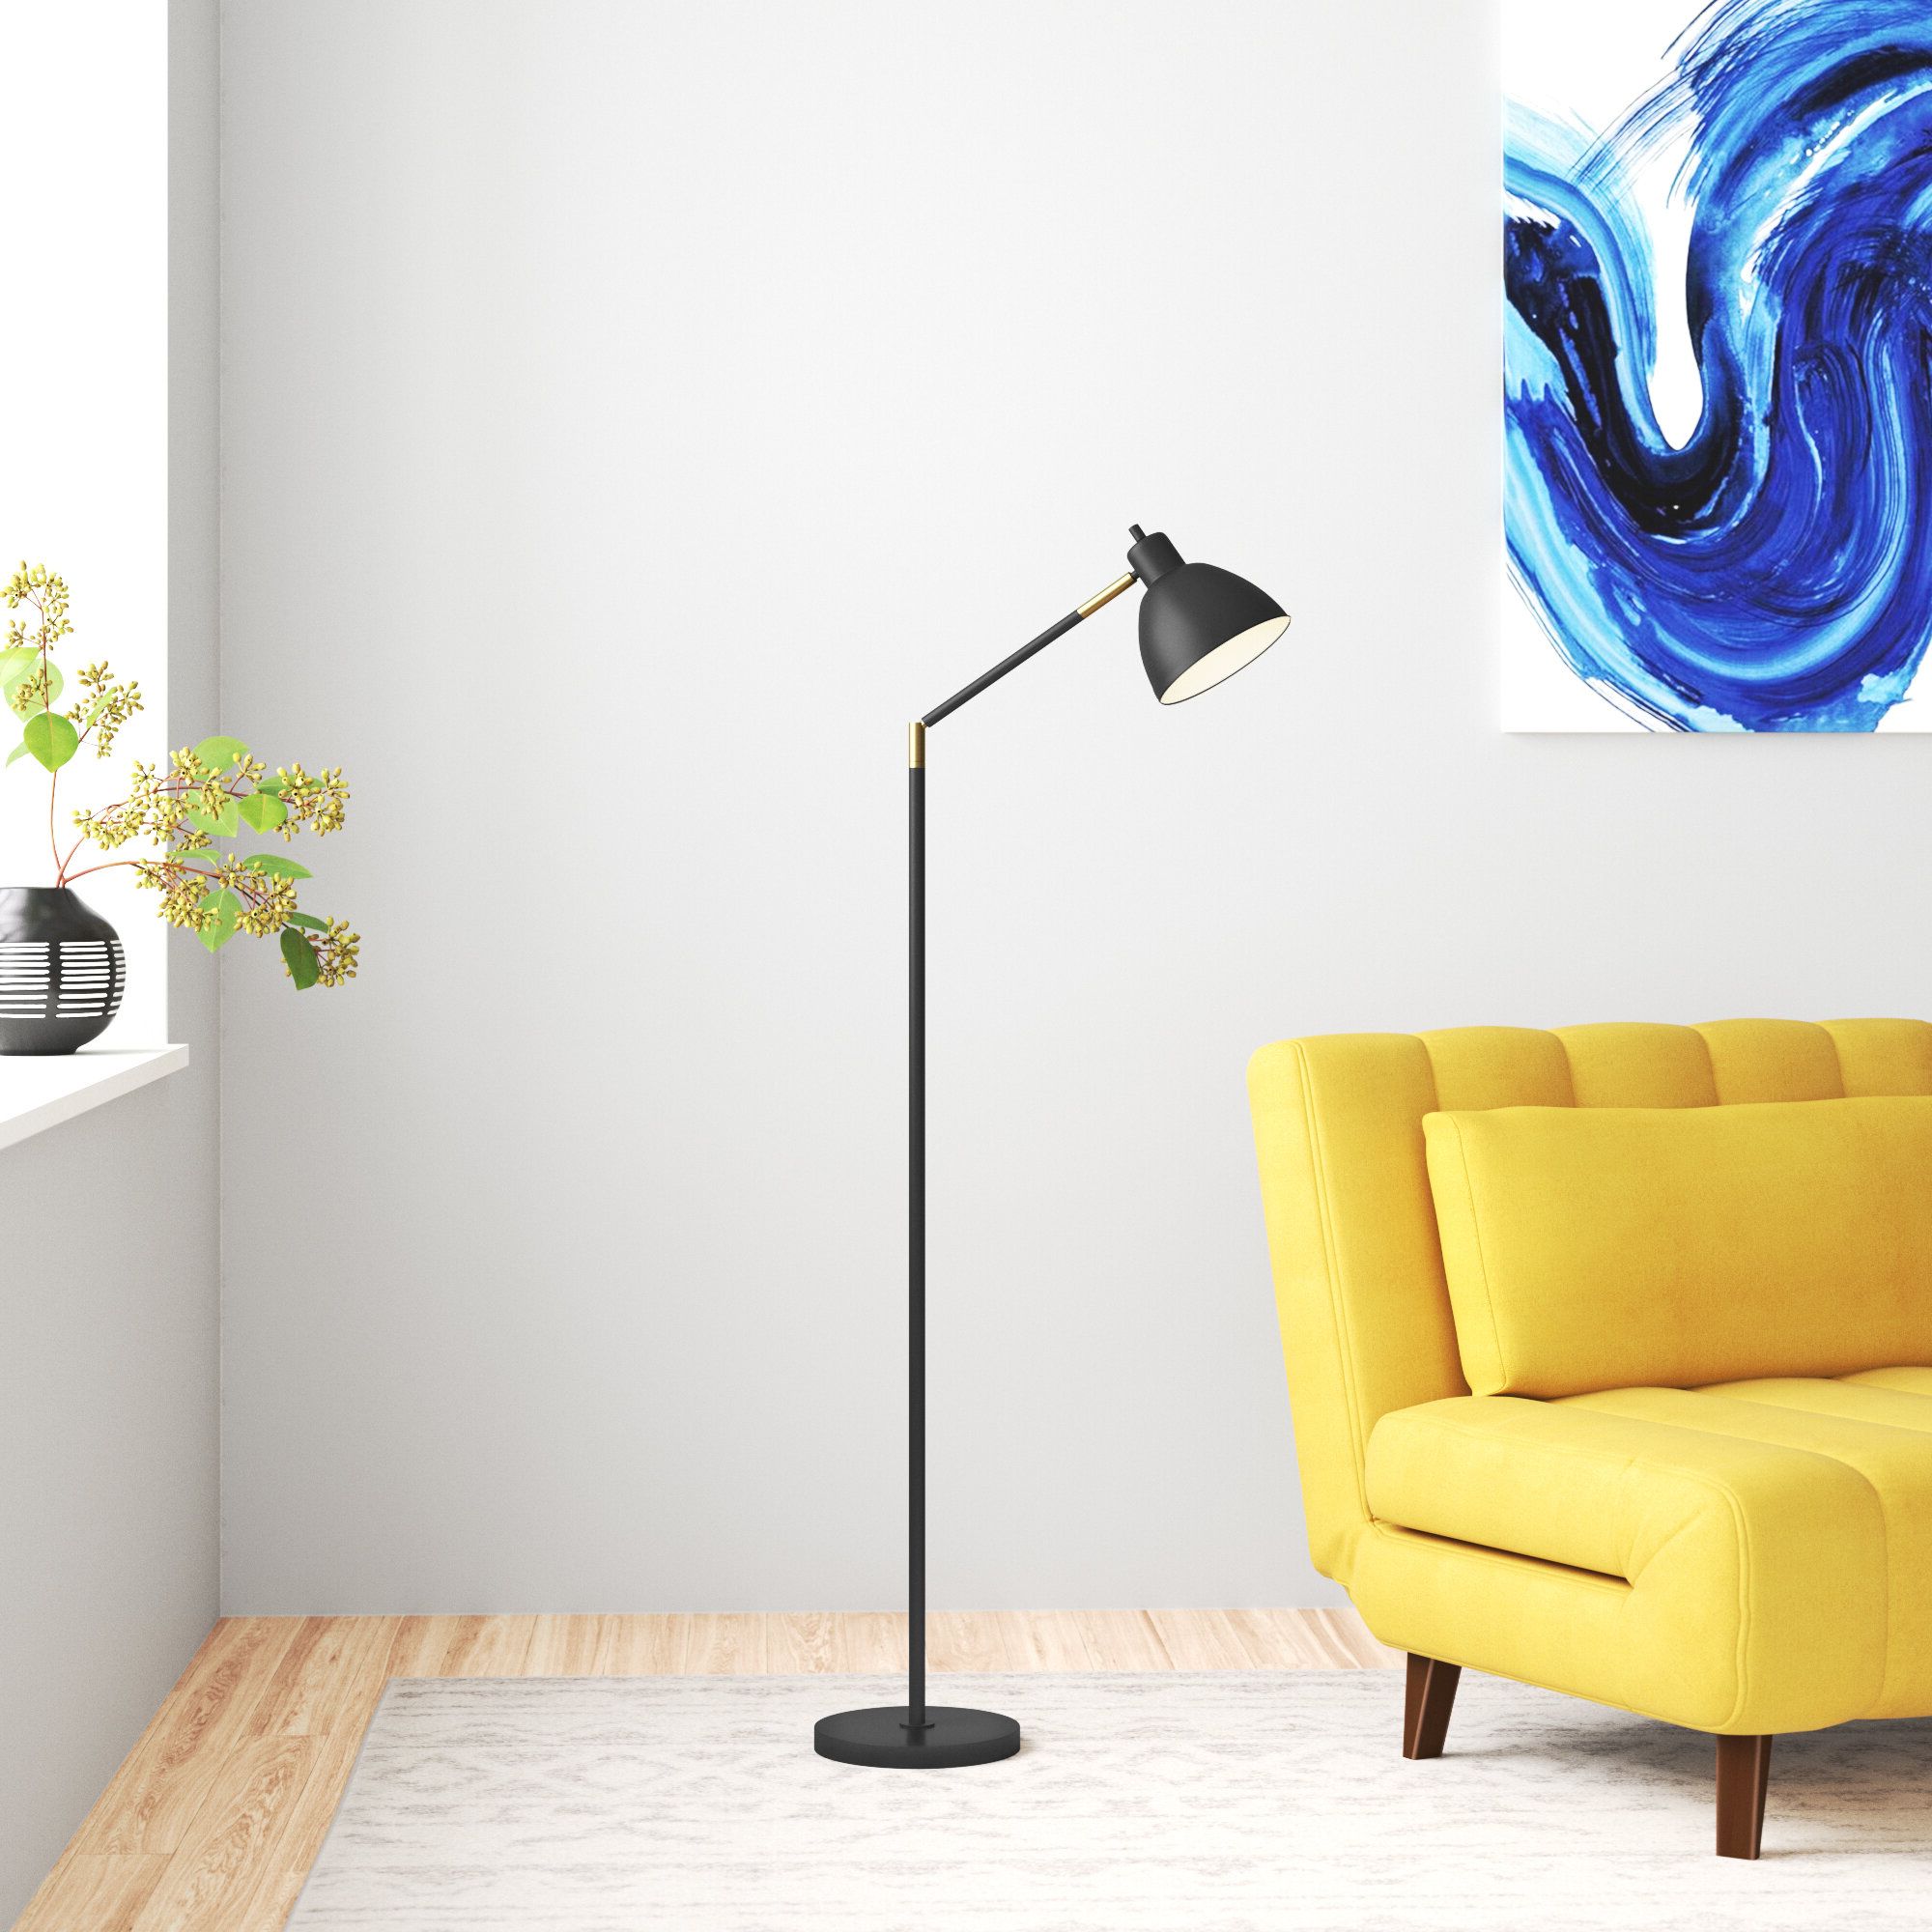 Wayfair | Cone Shaped Floor Lamps You'll Love In 2023 Intended For Cone Floor Lamps (View 13 of 20)